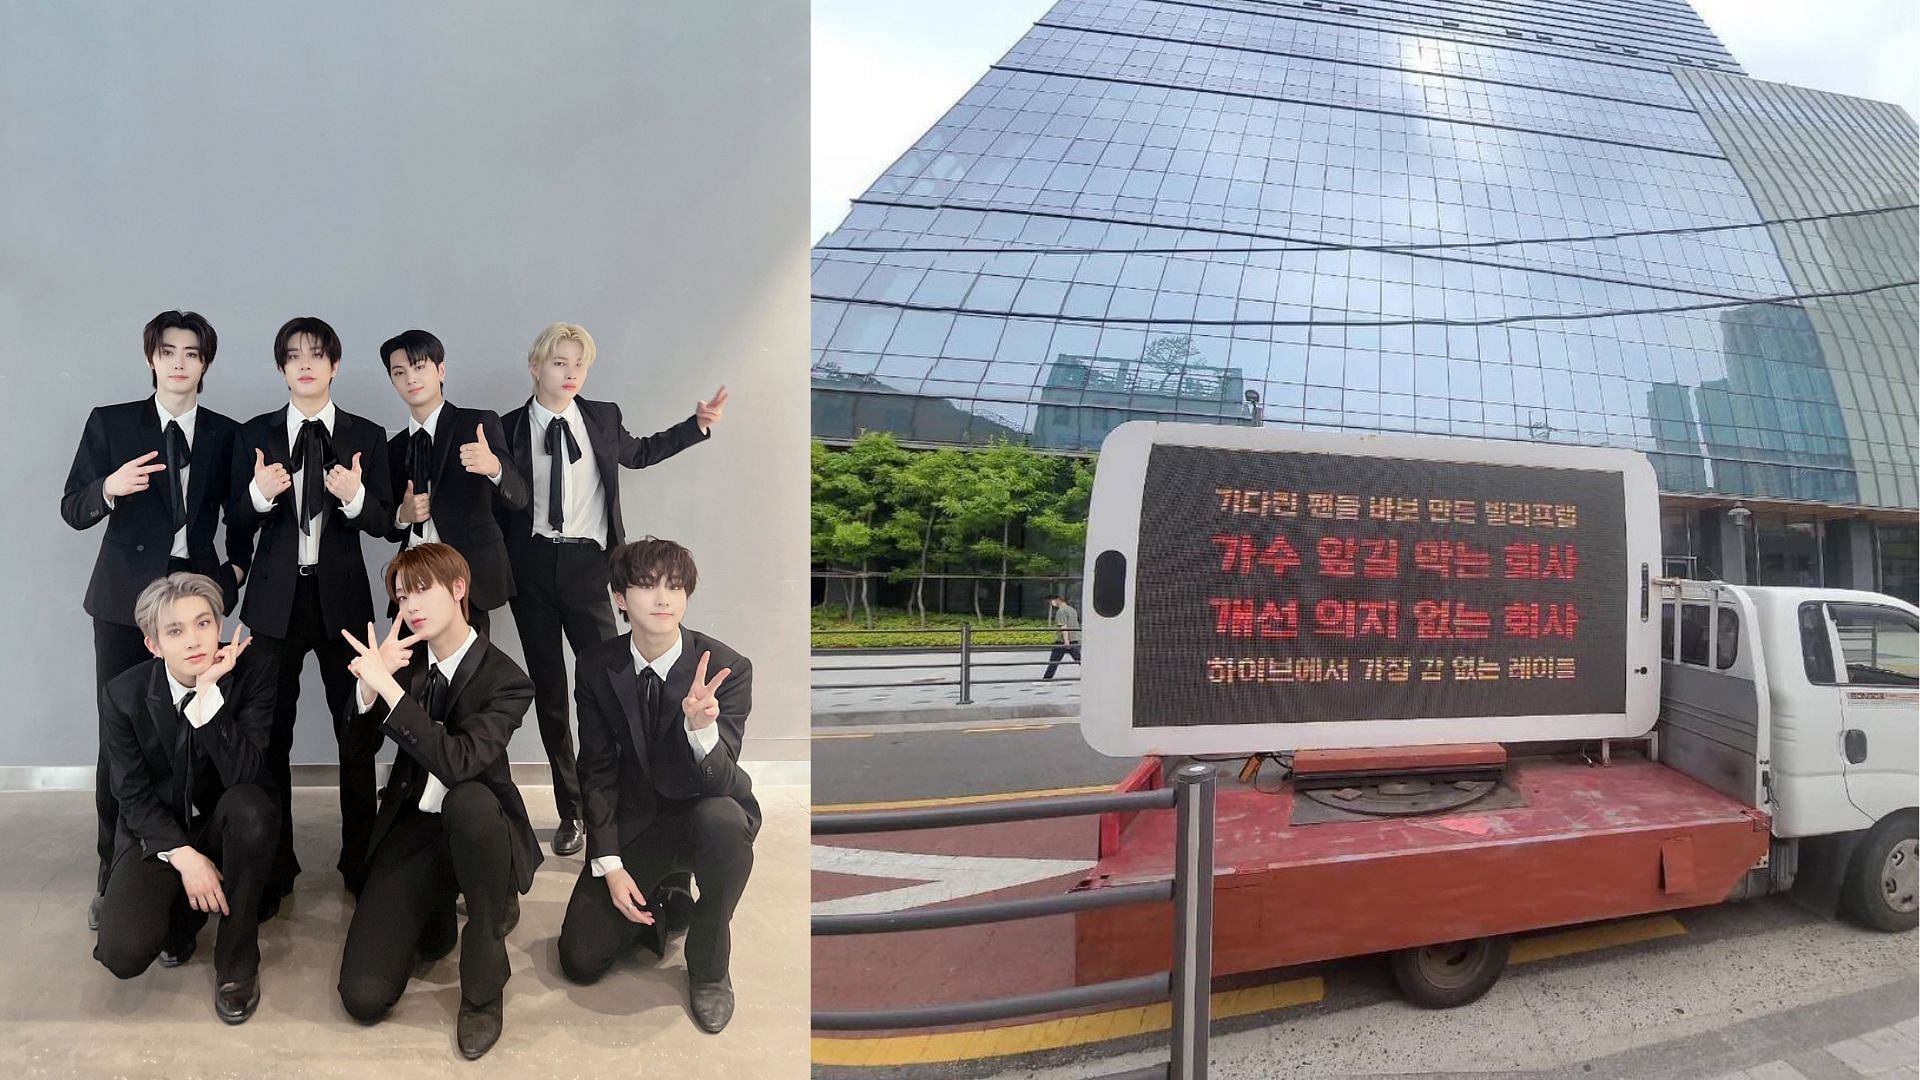 The K-pop fandoms of EXO and ENHYPEN have sent protest trucks to the groups